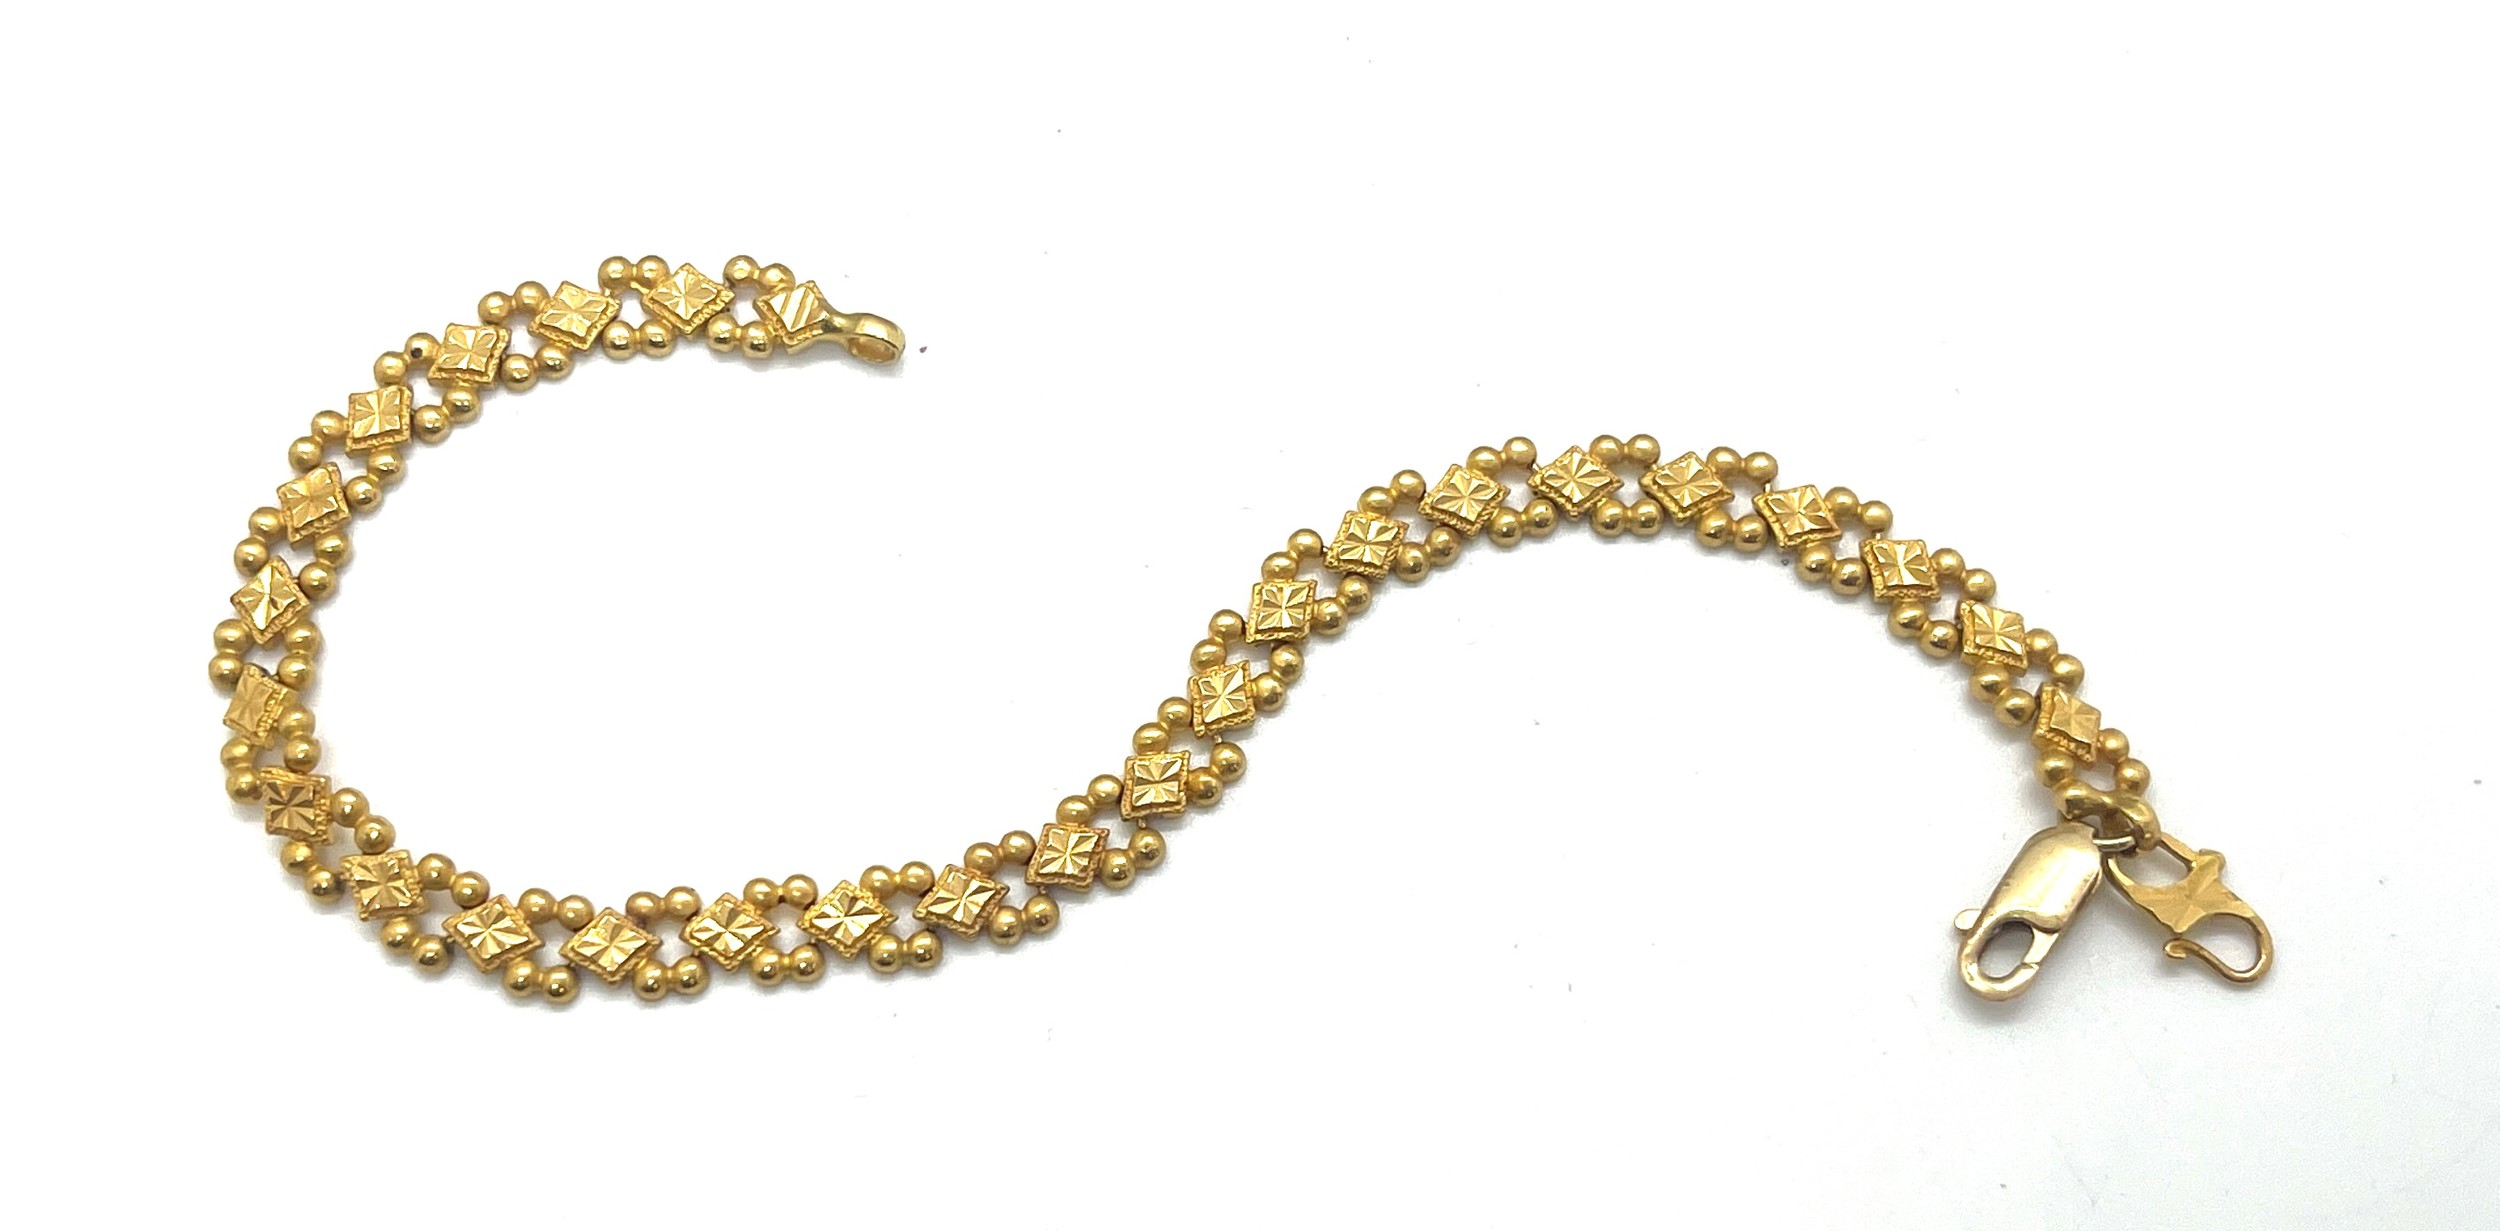 22ct gold ladies bracelet, with a repaired clasp which is 9ct gold, overall weight 12.4g, length